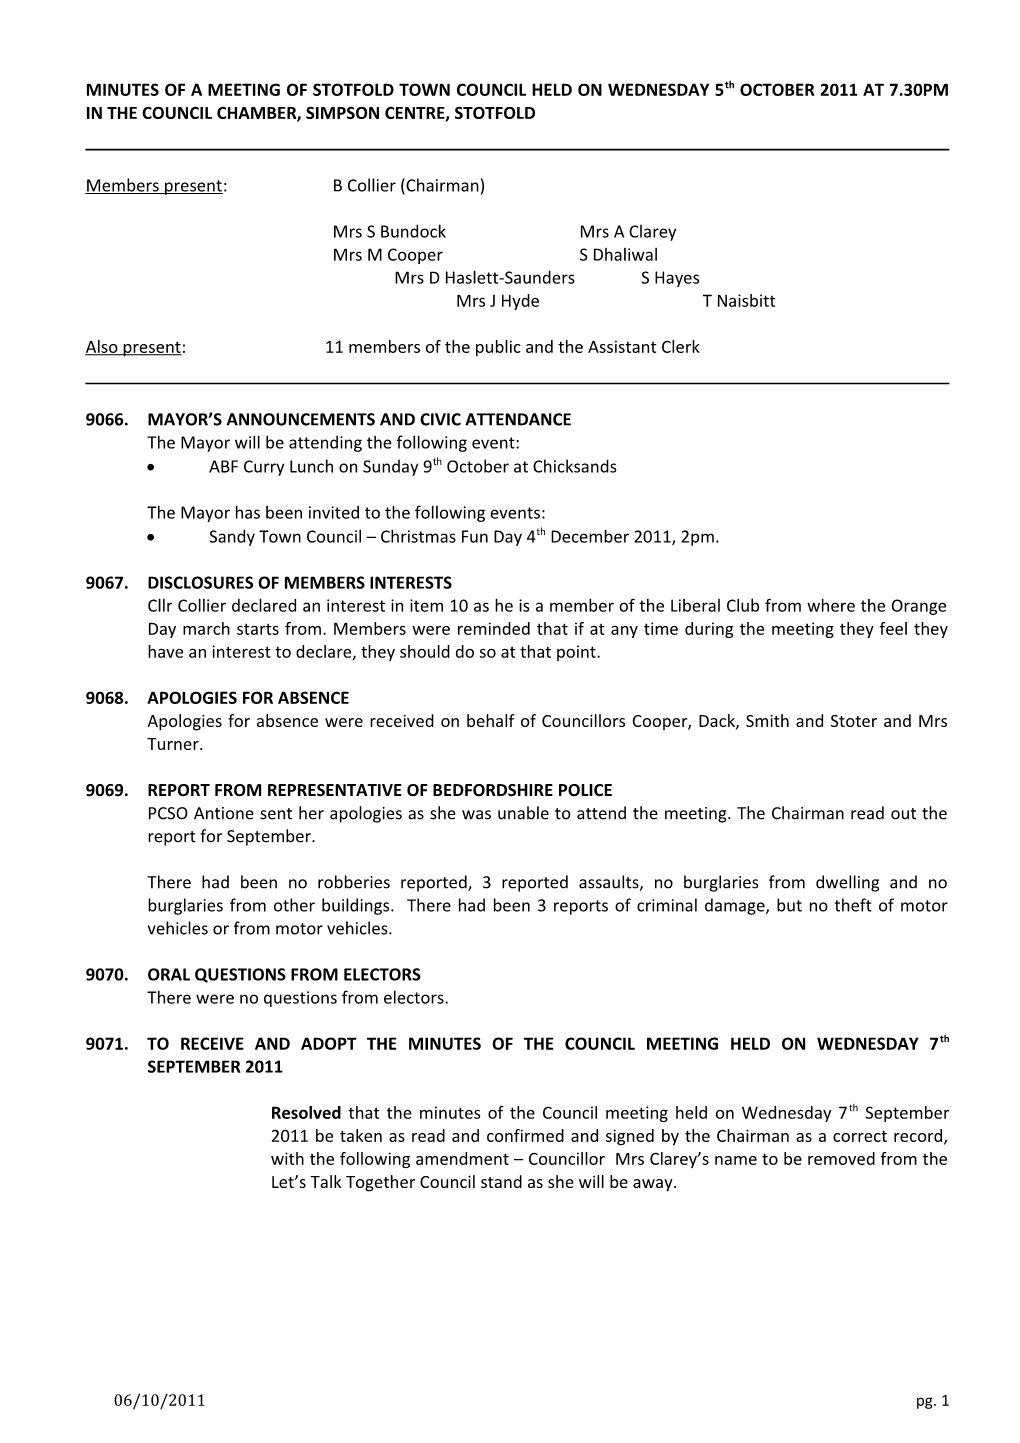 MINUTES of a MEETING of STOTFOLD TOWN COUNCIL HELD on WEDNESDAY 5Th OCTOBER 2011 at 7